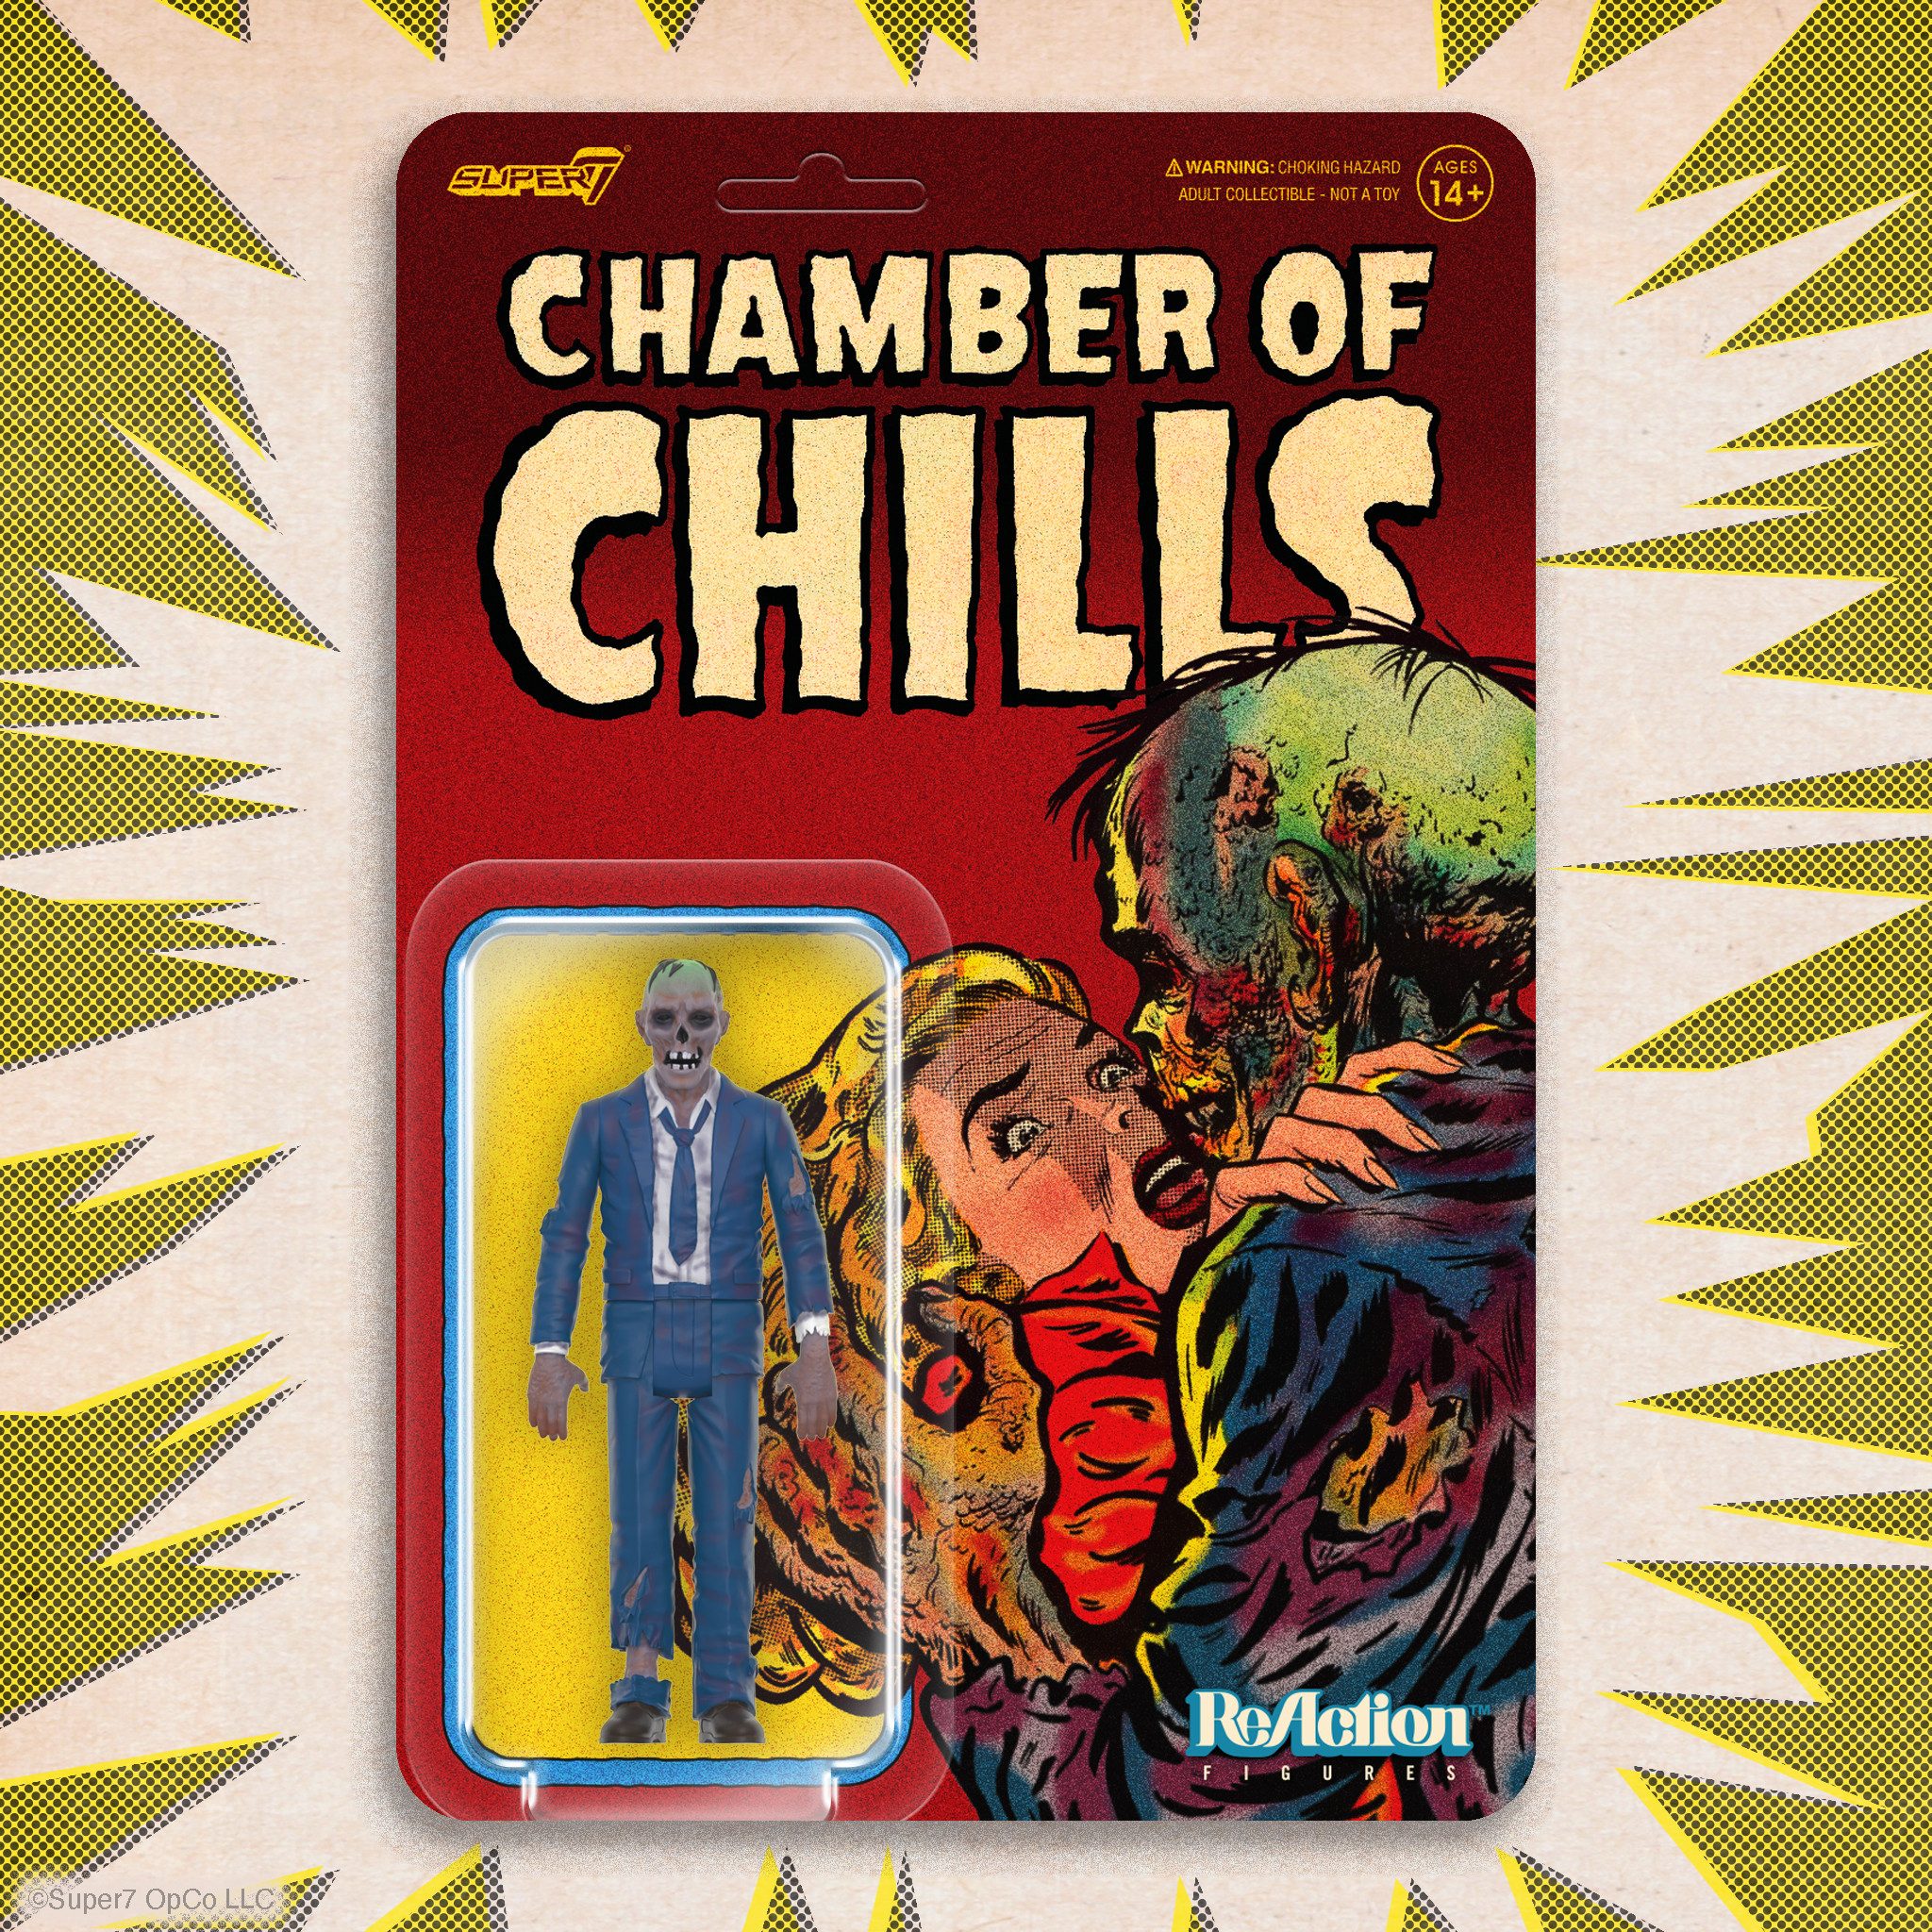 Super7 Actionfigur PRE-CODE HORROR CHAMBER CHILLS HEARTLESS ZOMBIE REACTION ACTIONFIGUR